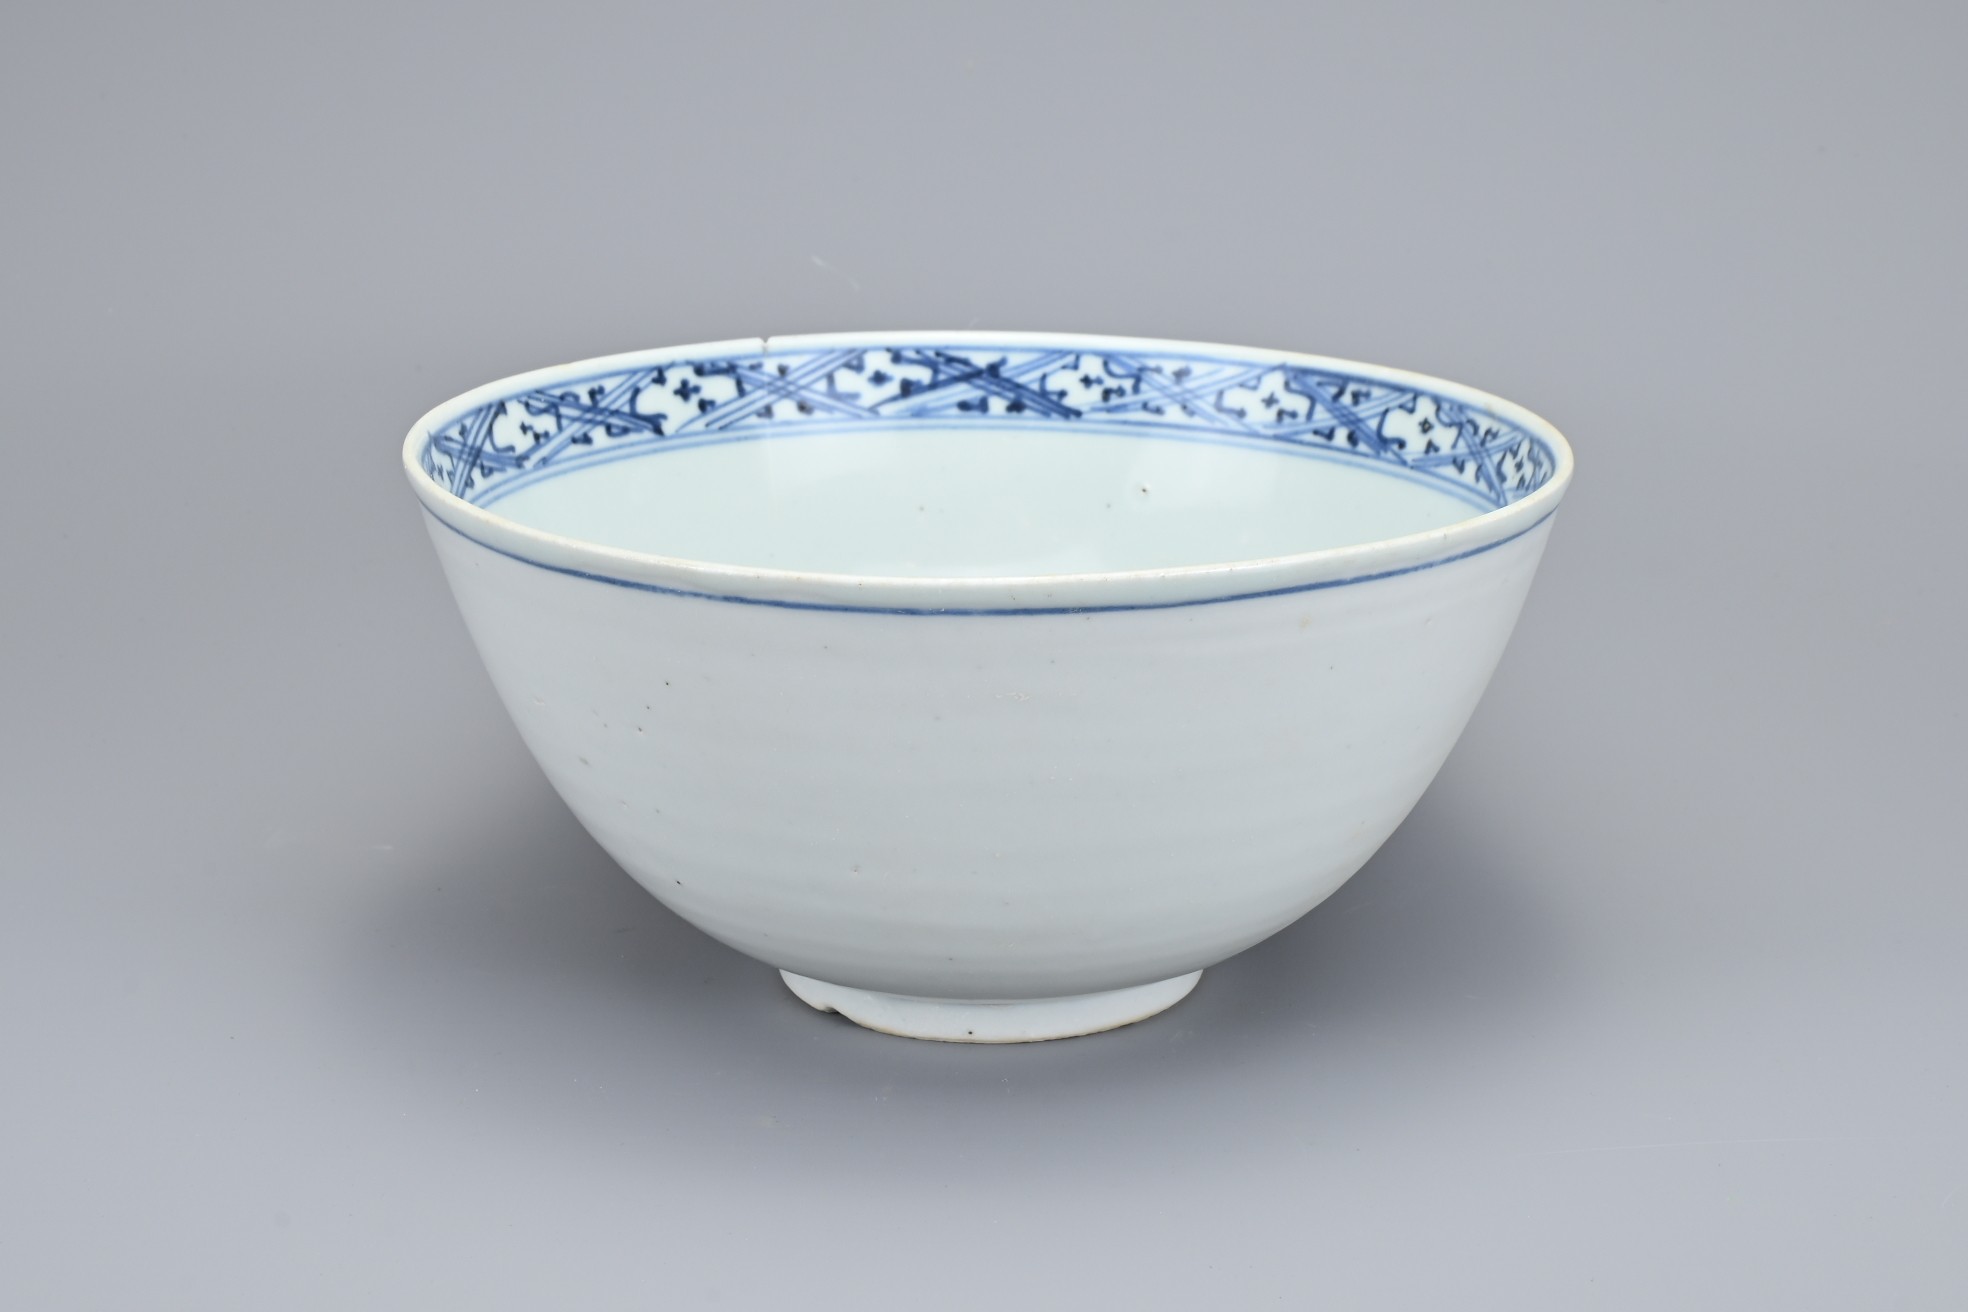 A LARGE CHINESE BLUE & WHITE PORCELAIN BOWL, MING DYNASTY, 16TH CENTURY. Decorated with a floral